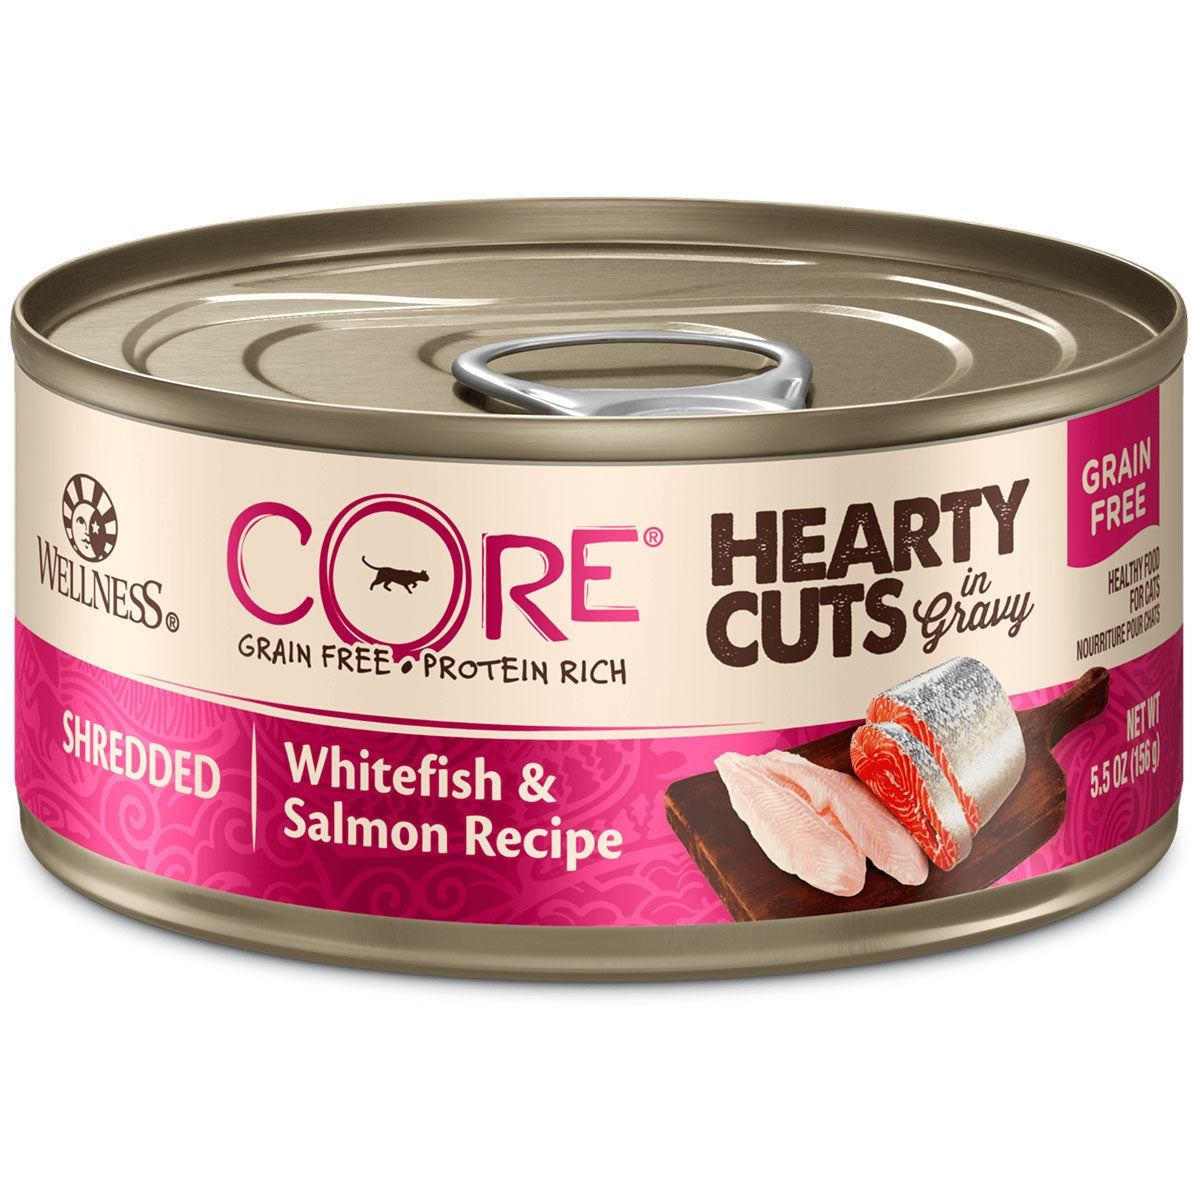 Wellness CORE Hearty Cuts for Cats - Grain Free Whitefish & Salmon can 5.5oz